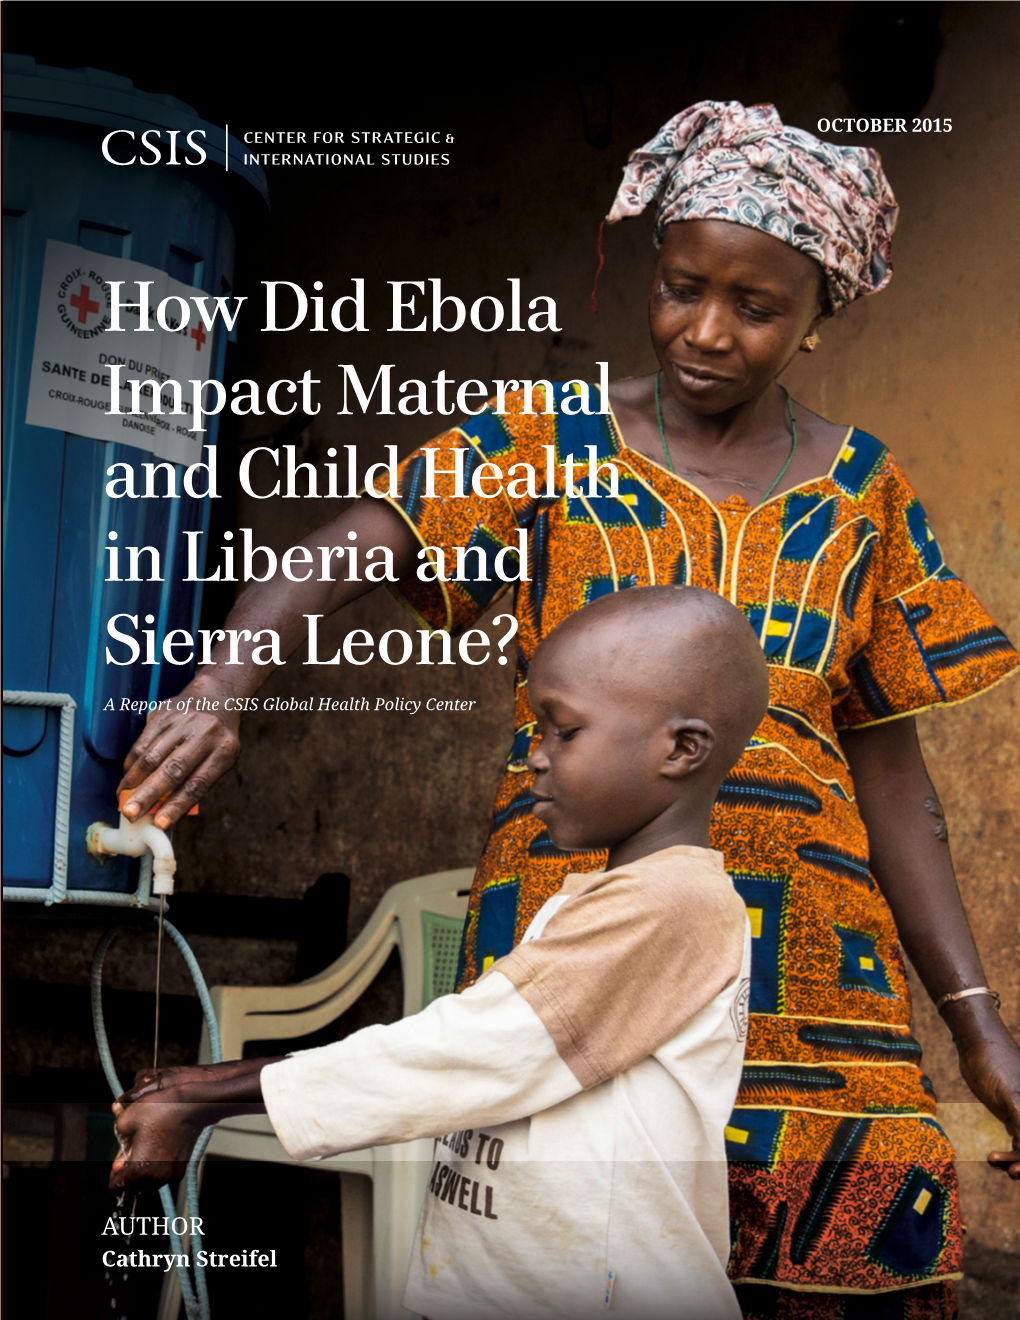 How Did Ebola Impact Maternal and Child Health in Liberia and Sierra Leone? a Report of the CSIS Global Health Policy Center